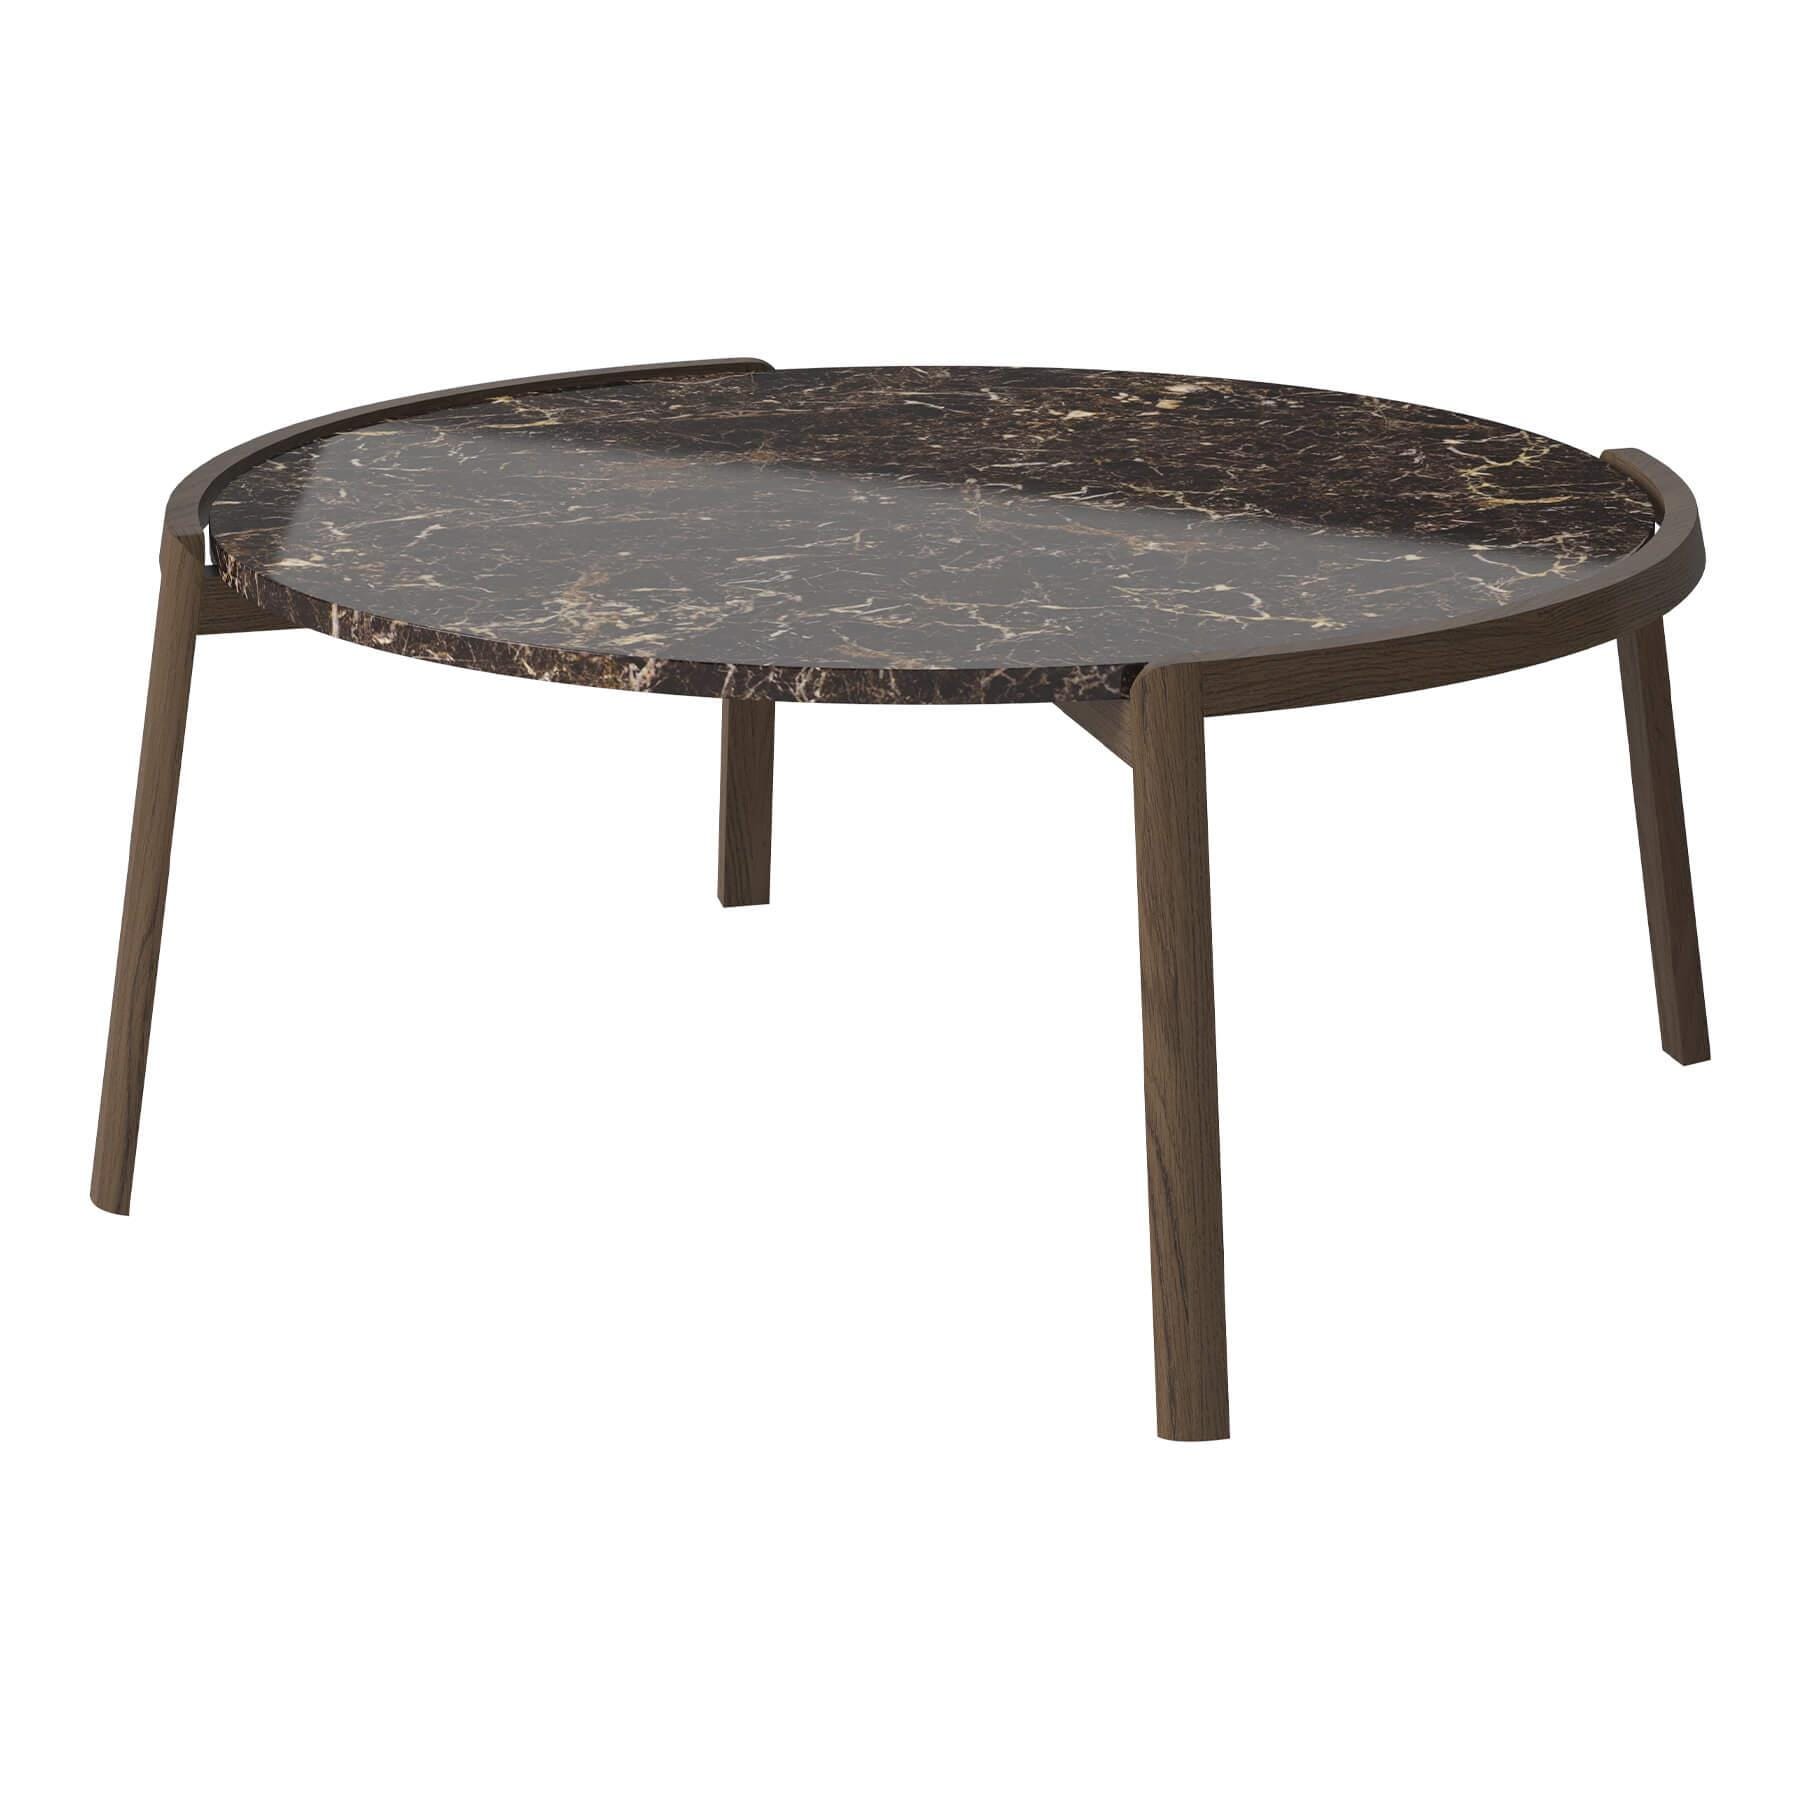 Bolia Mix Coffee Table Large Dark Oiled Legs Brown Marble Designer Furniture From Holloways Of Ludlow